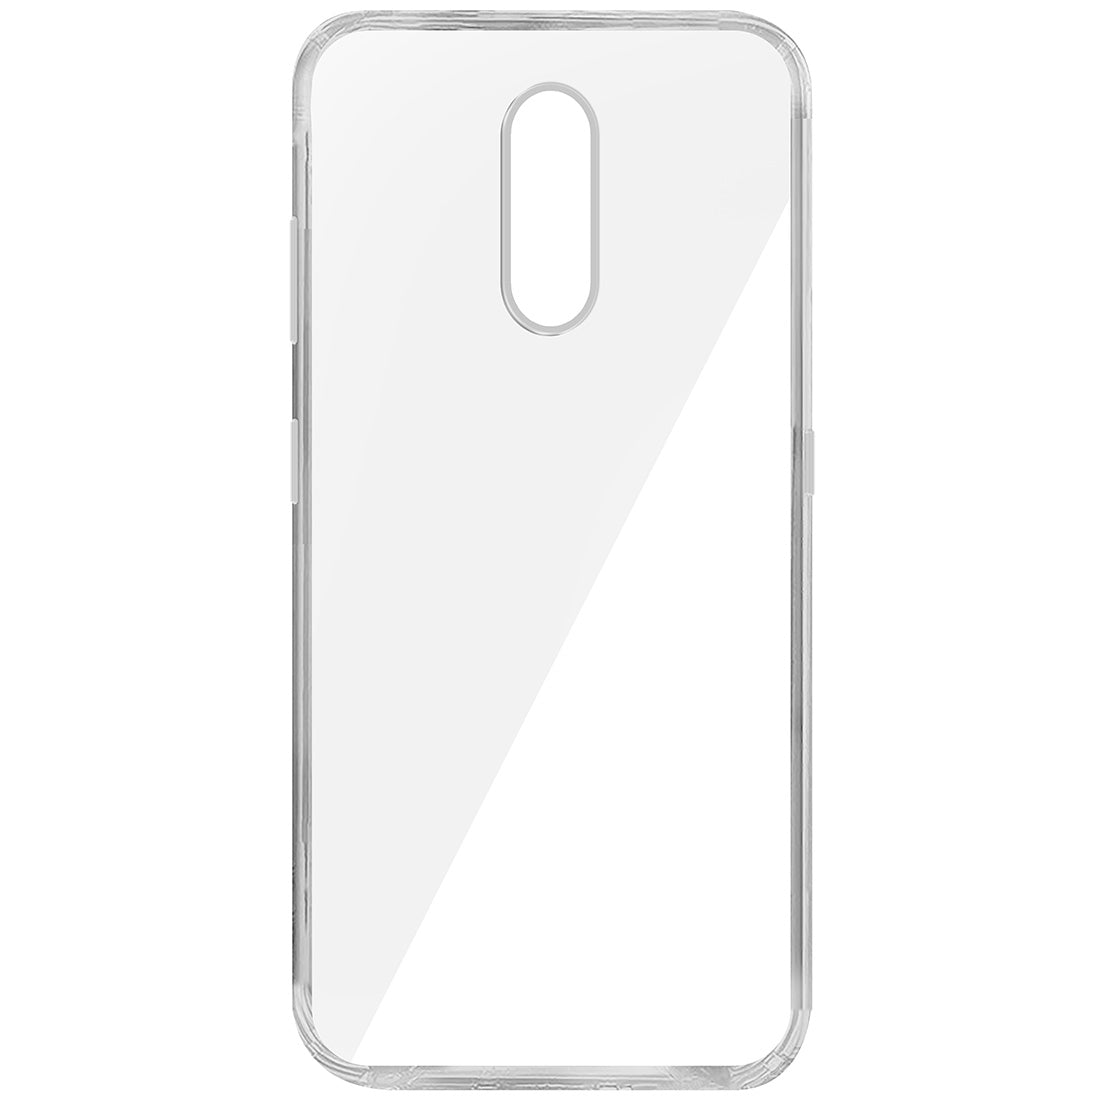 Clear Case for Nokia 3.2